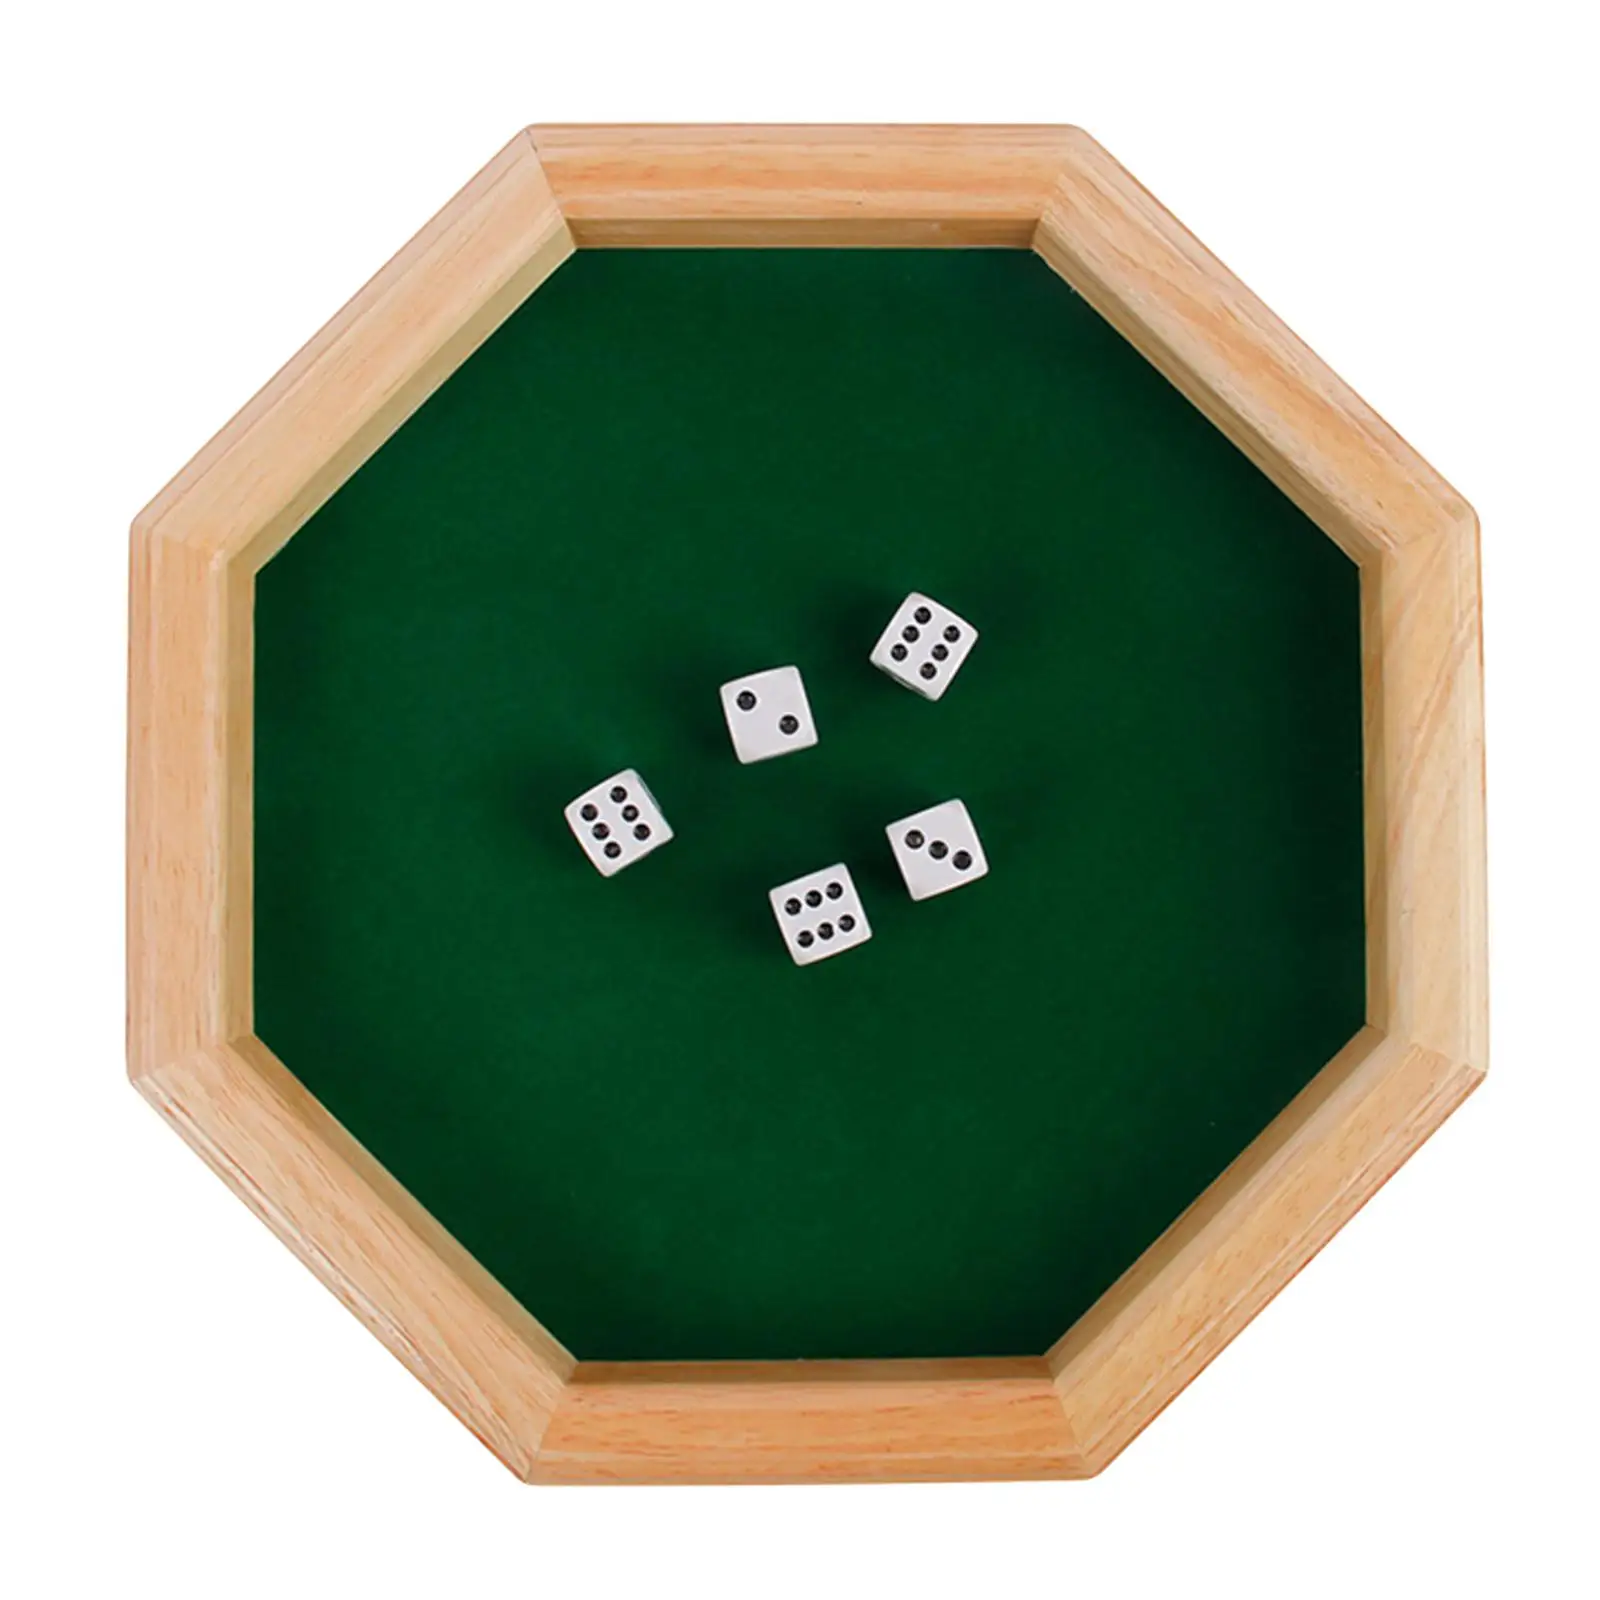 Luxury Octagonal Wooden Tray (Green, with ) for Party Games